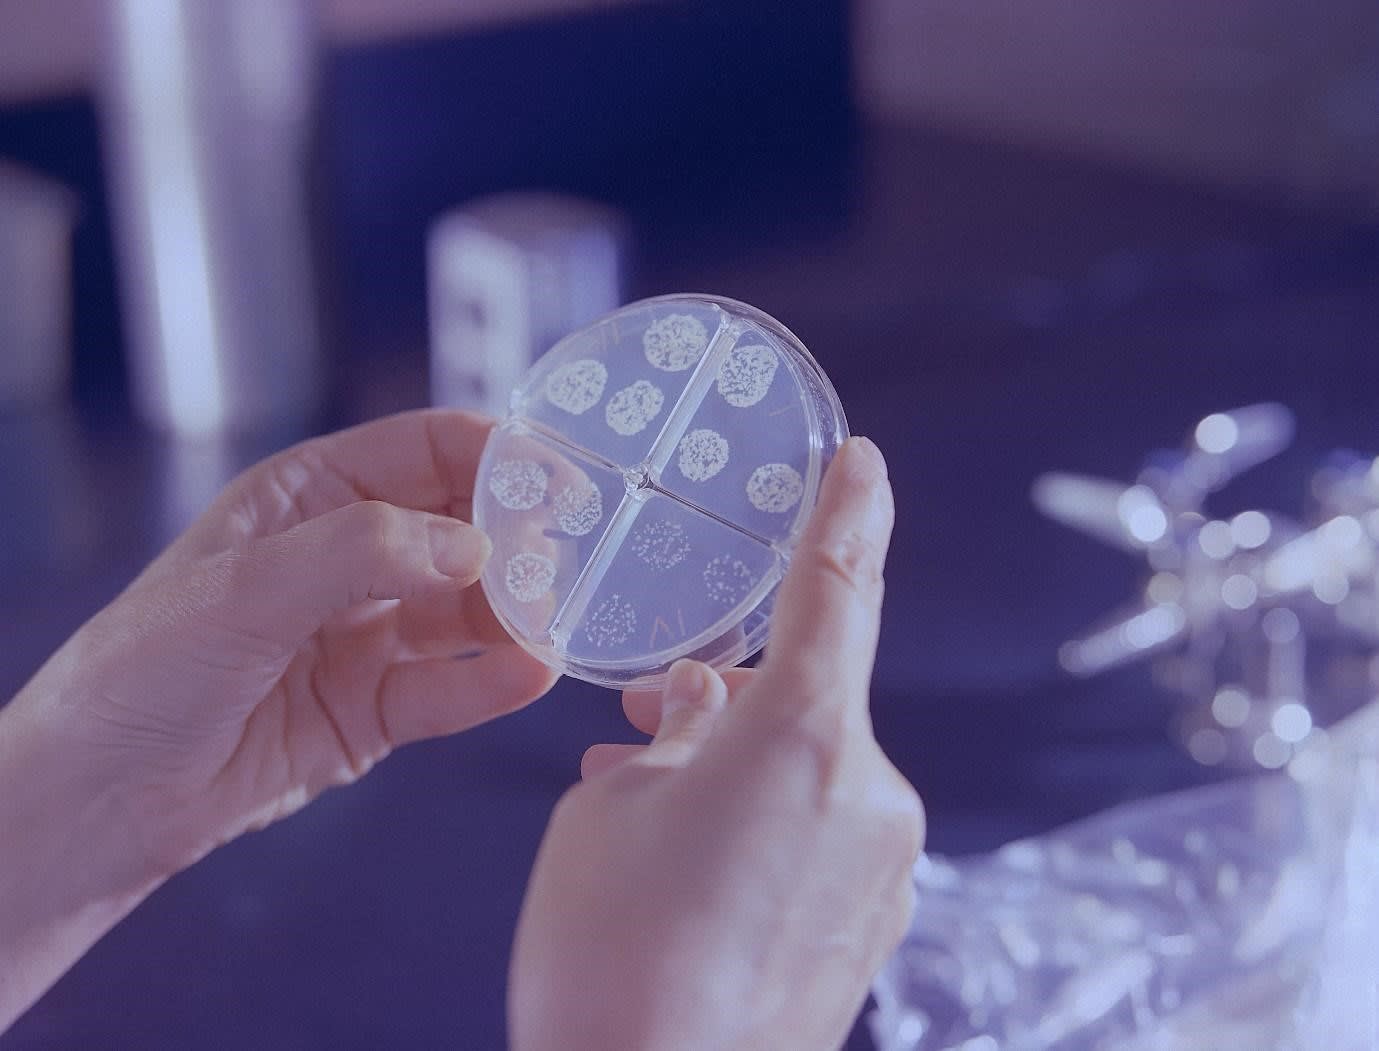 Scientist's hand holding a petri dish with microbes